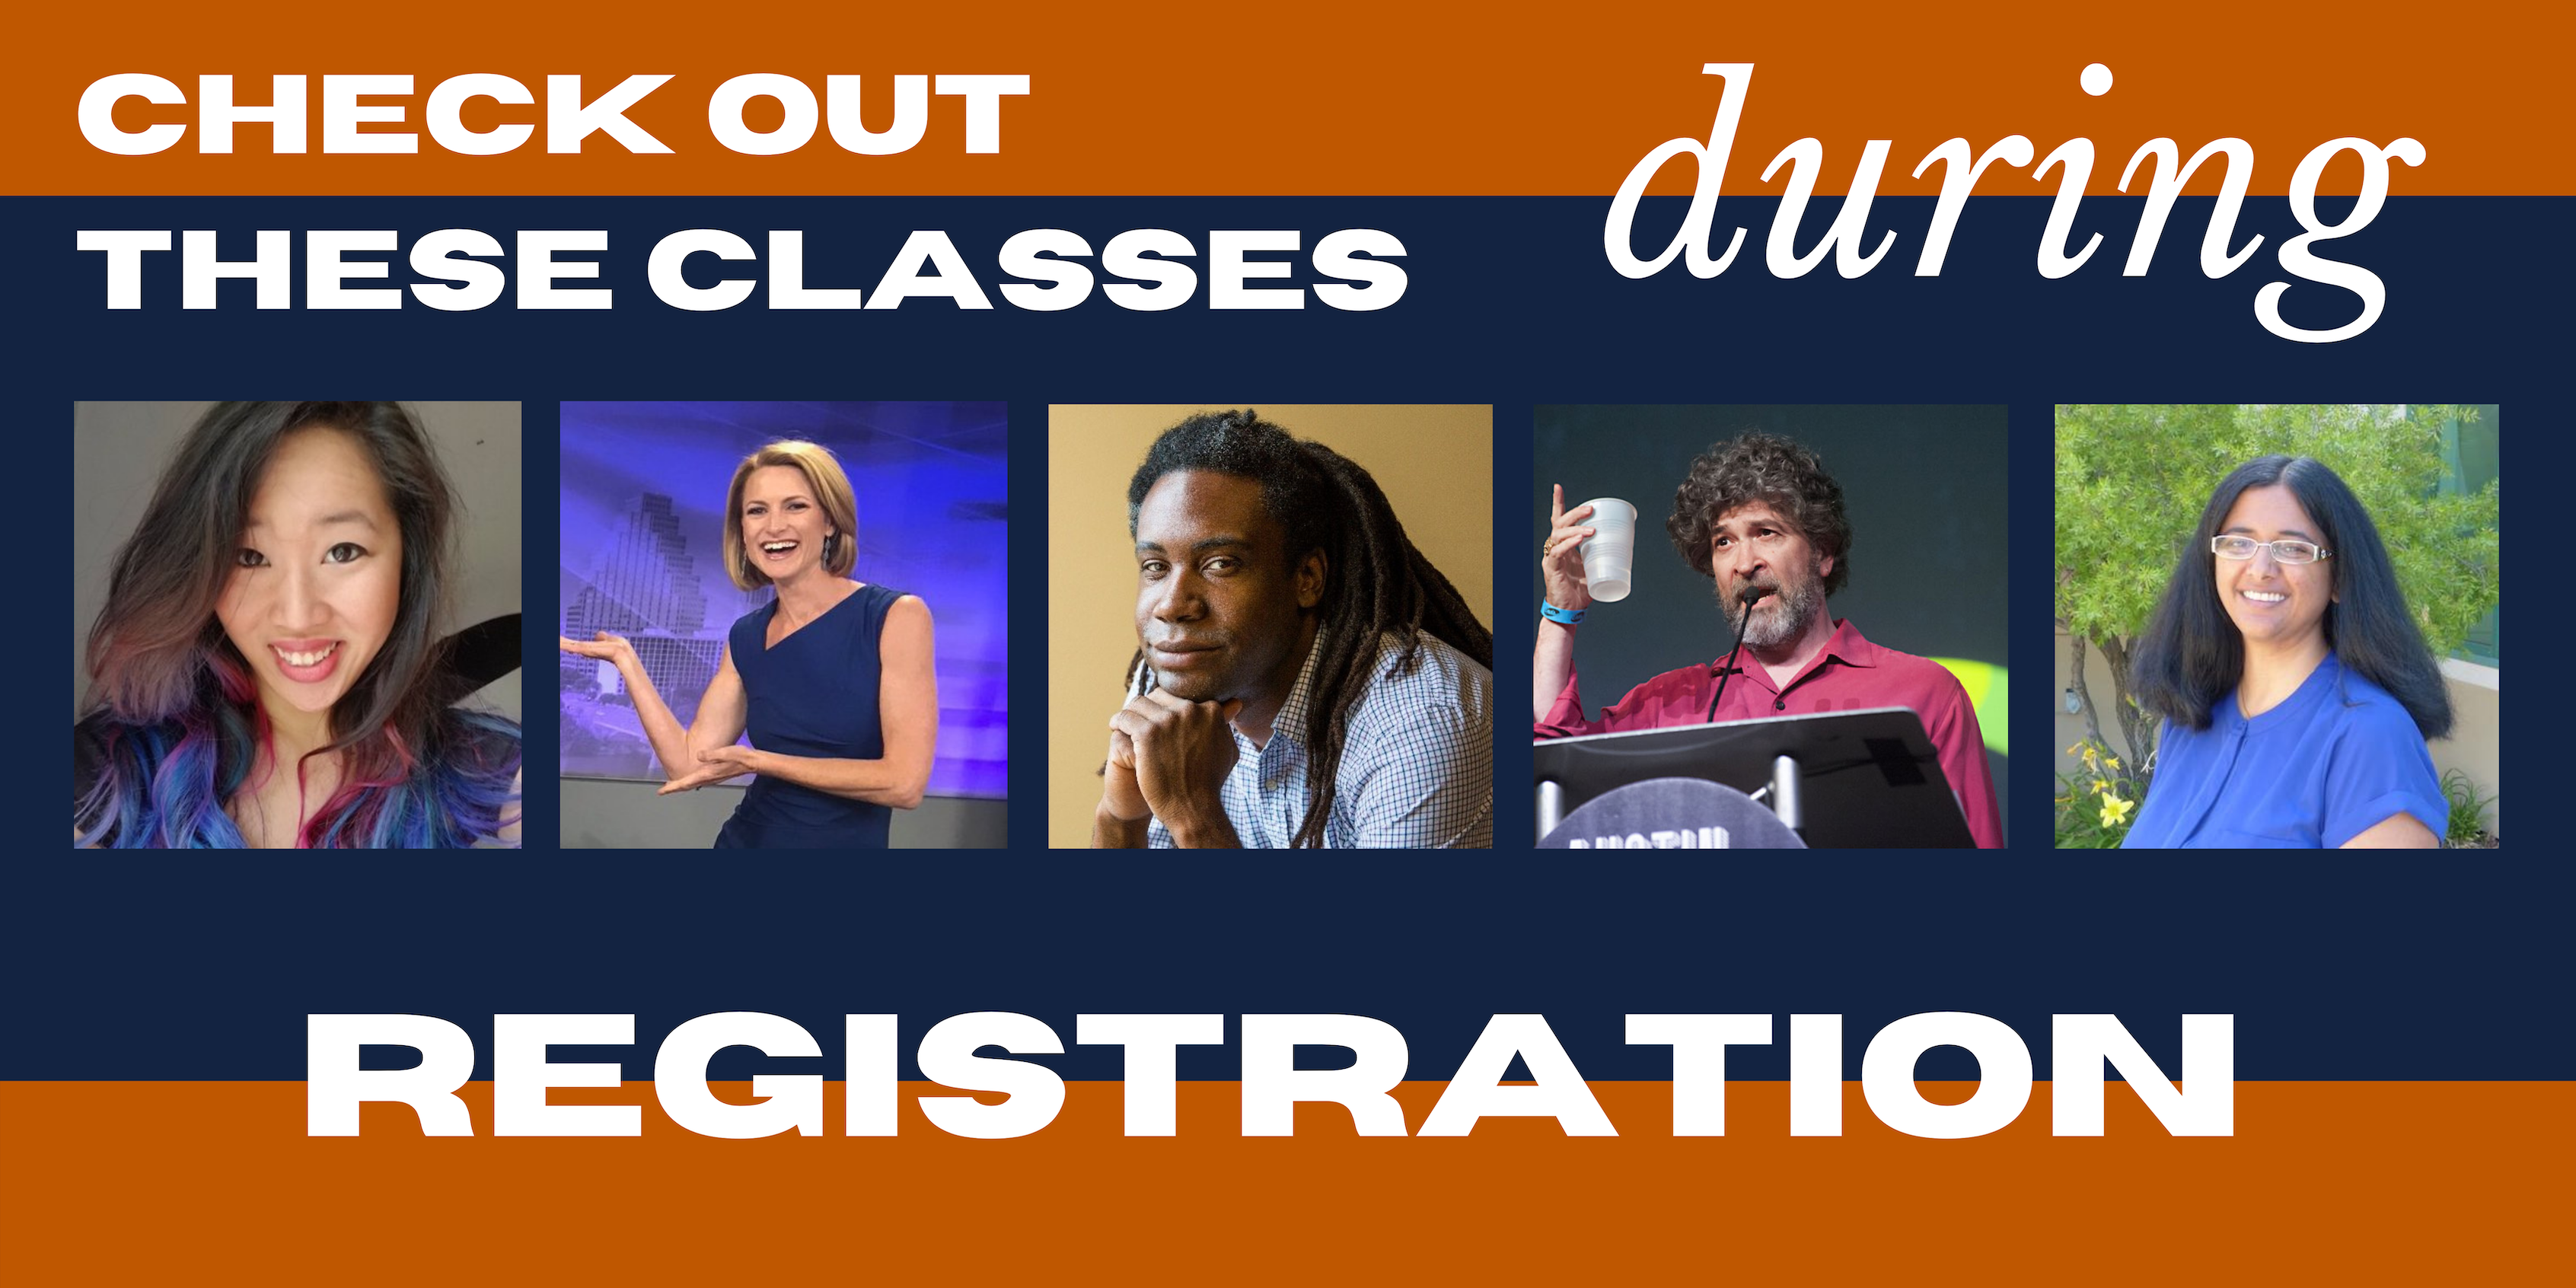 In the middle of the graphic in front of a dark blue background are 5 photos of professors at the University of Texas at Austin School of Journalism and Media. At the top is an orange bar with white text that says, "Check our these classes during," and at the bottom is an orange bar with white text that says, "Registration."